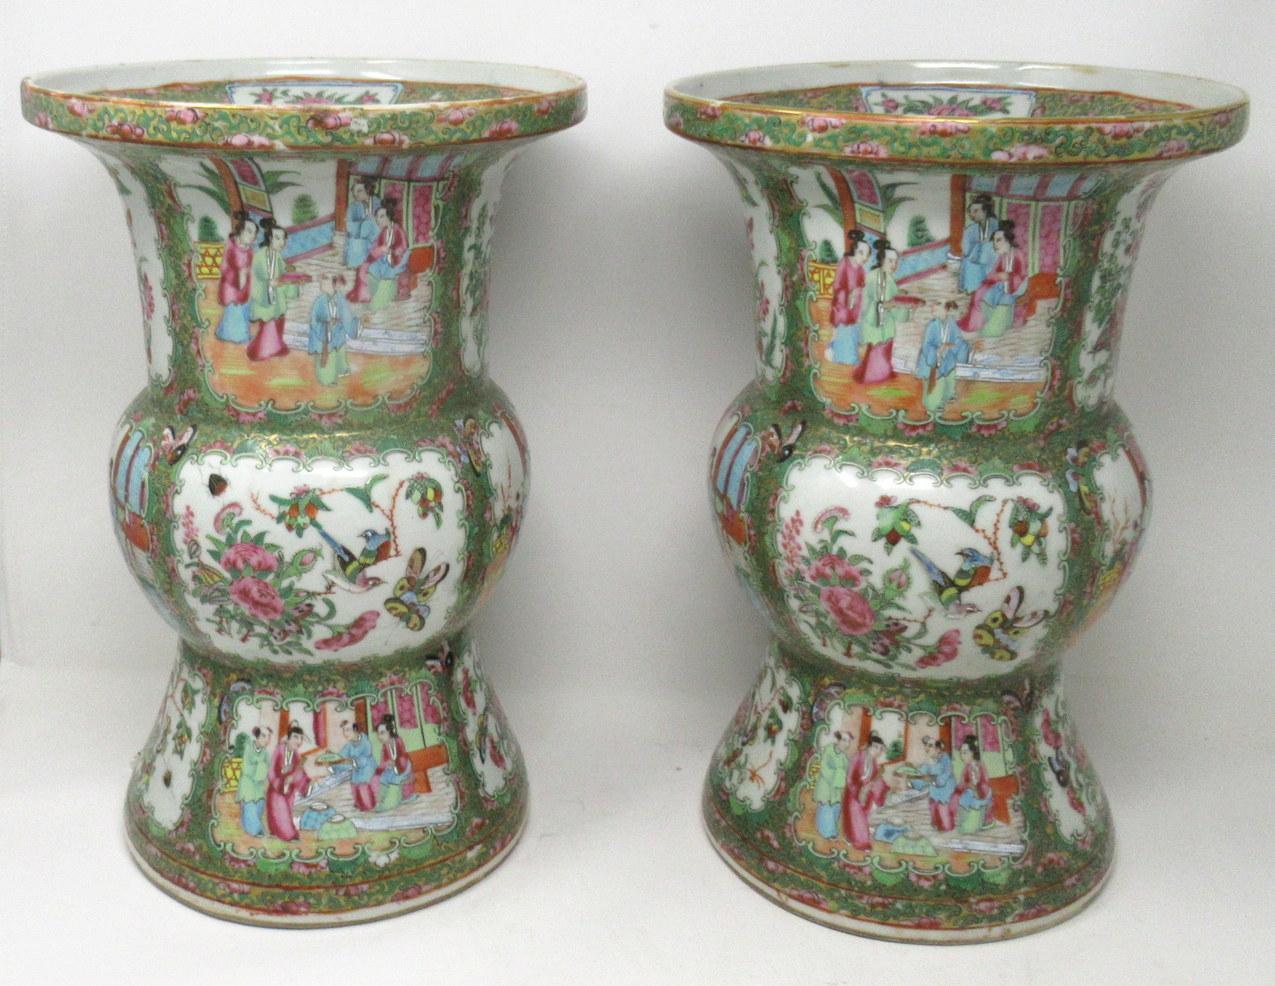 Antique Pair Famille Rose Medallion Canton Cantonese Chinese Gu Vases Urns 19ct In Good Condition For Sale In Dublin, Ireland